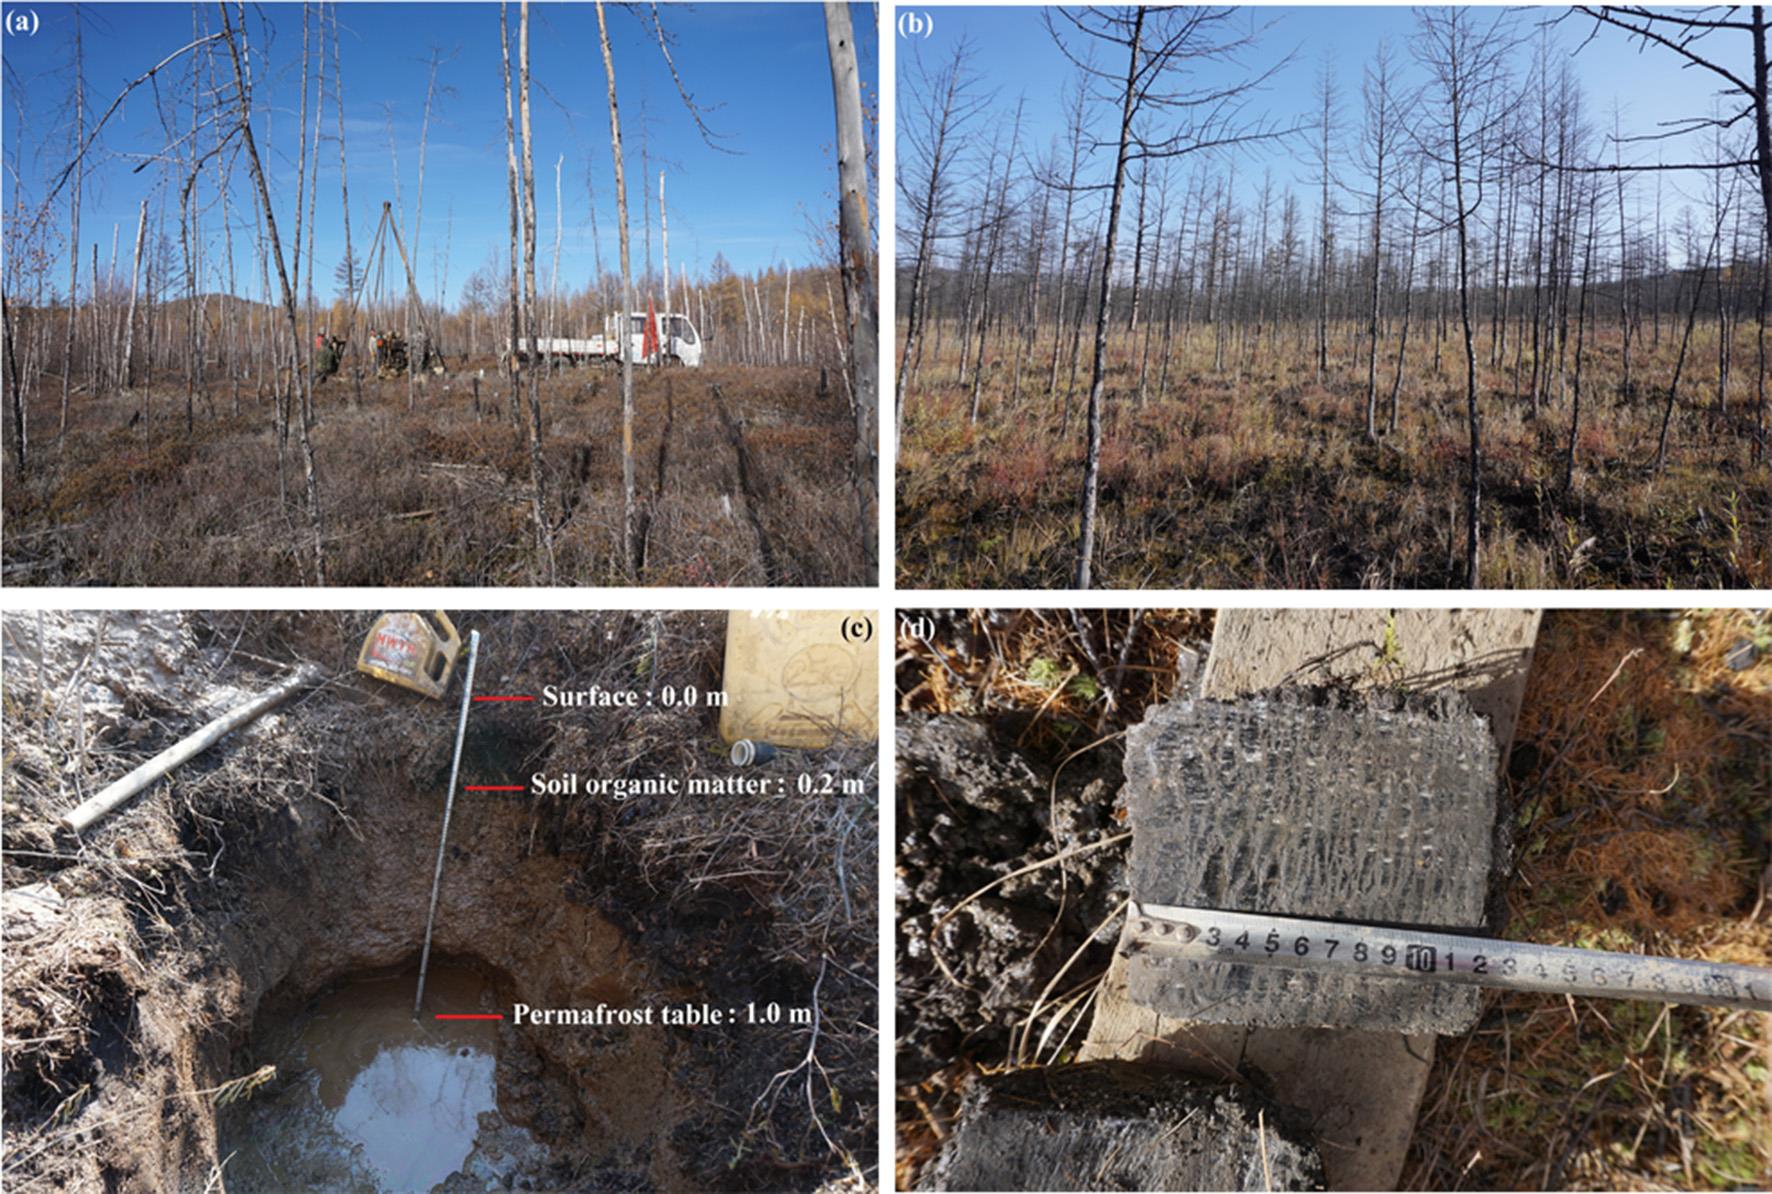 Forest Fires Affect Distributive Features of Soil Carbon and Nutrients in Permafrost Regions